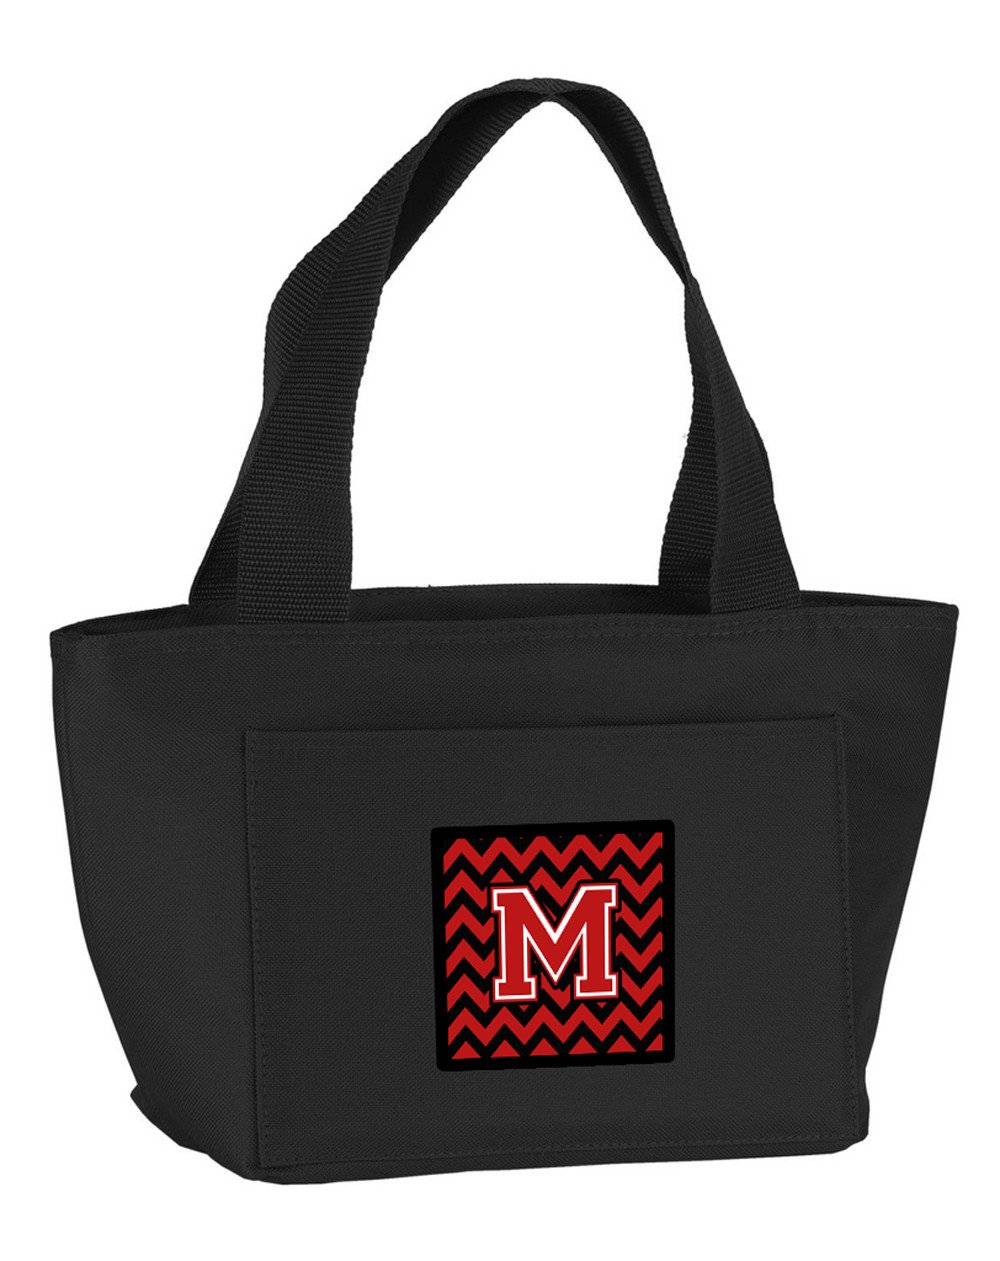 Letter M Chevron Black and Red   Lunch Bag CJ1047-MBK-8808 by Caroline&#39;s Treasures